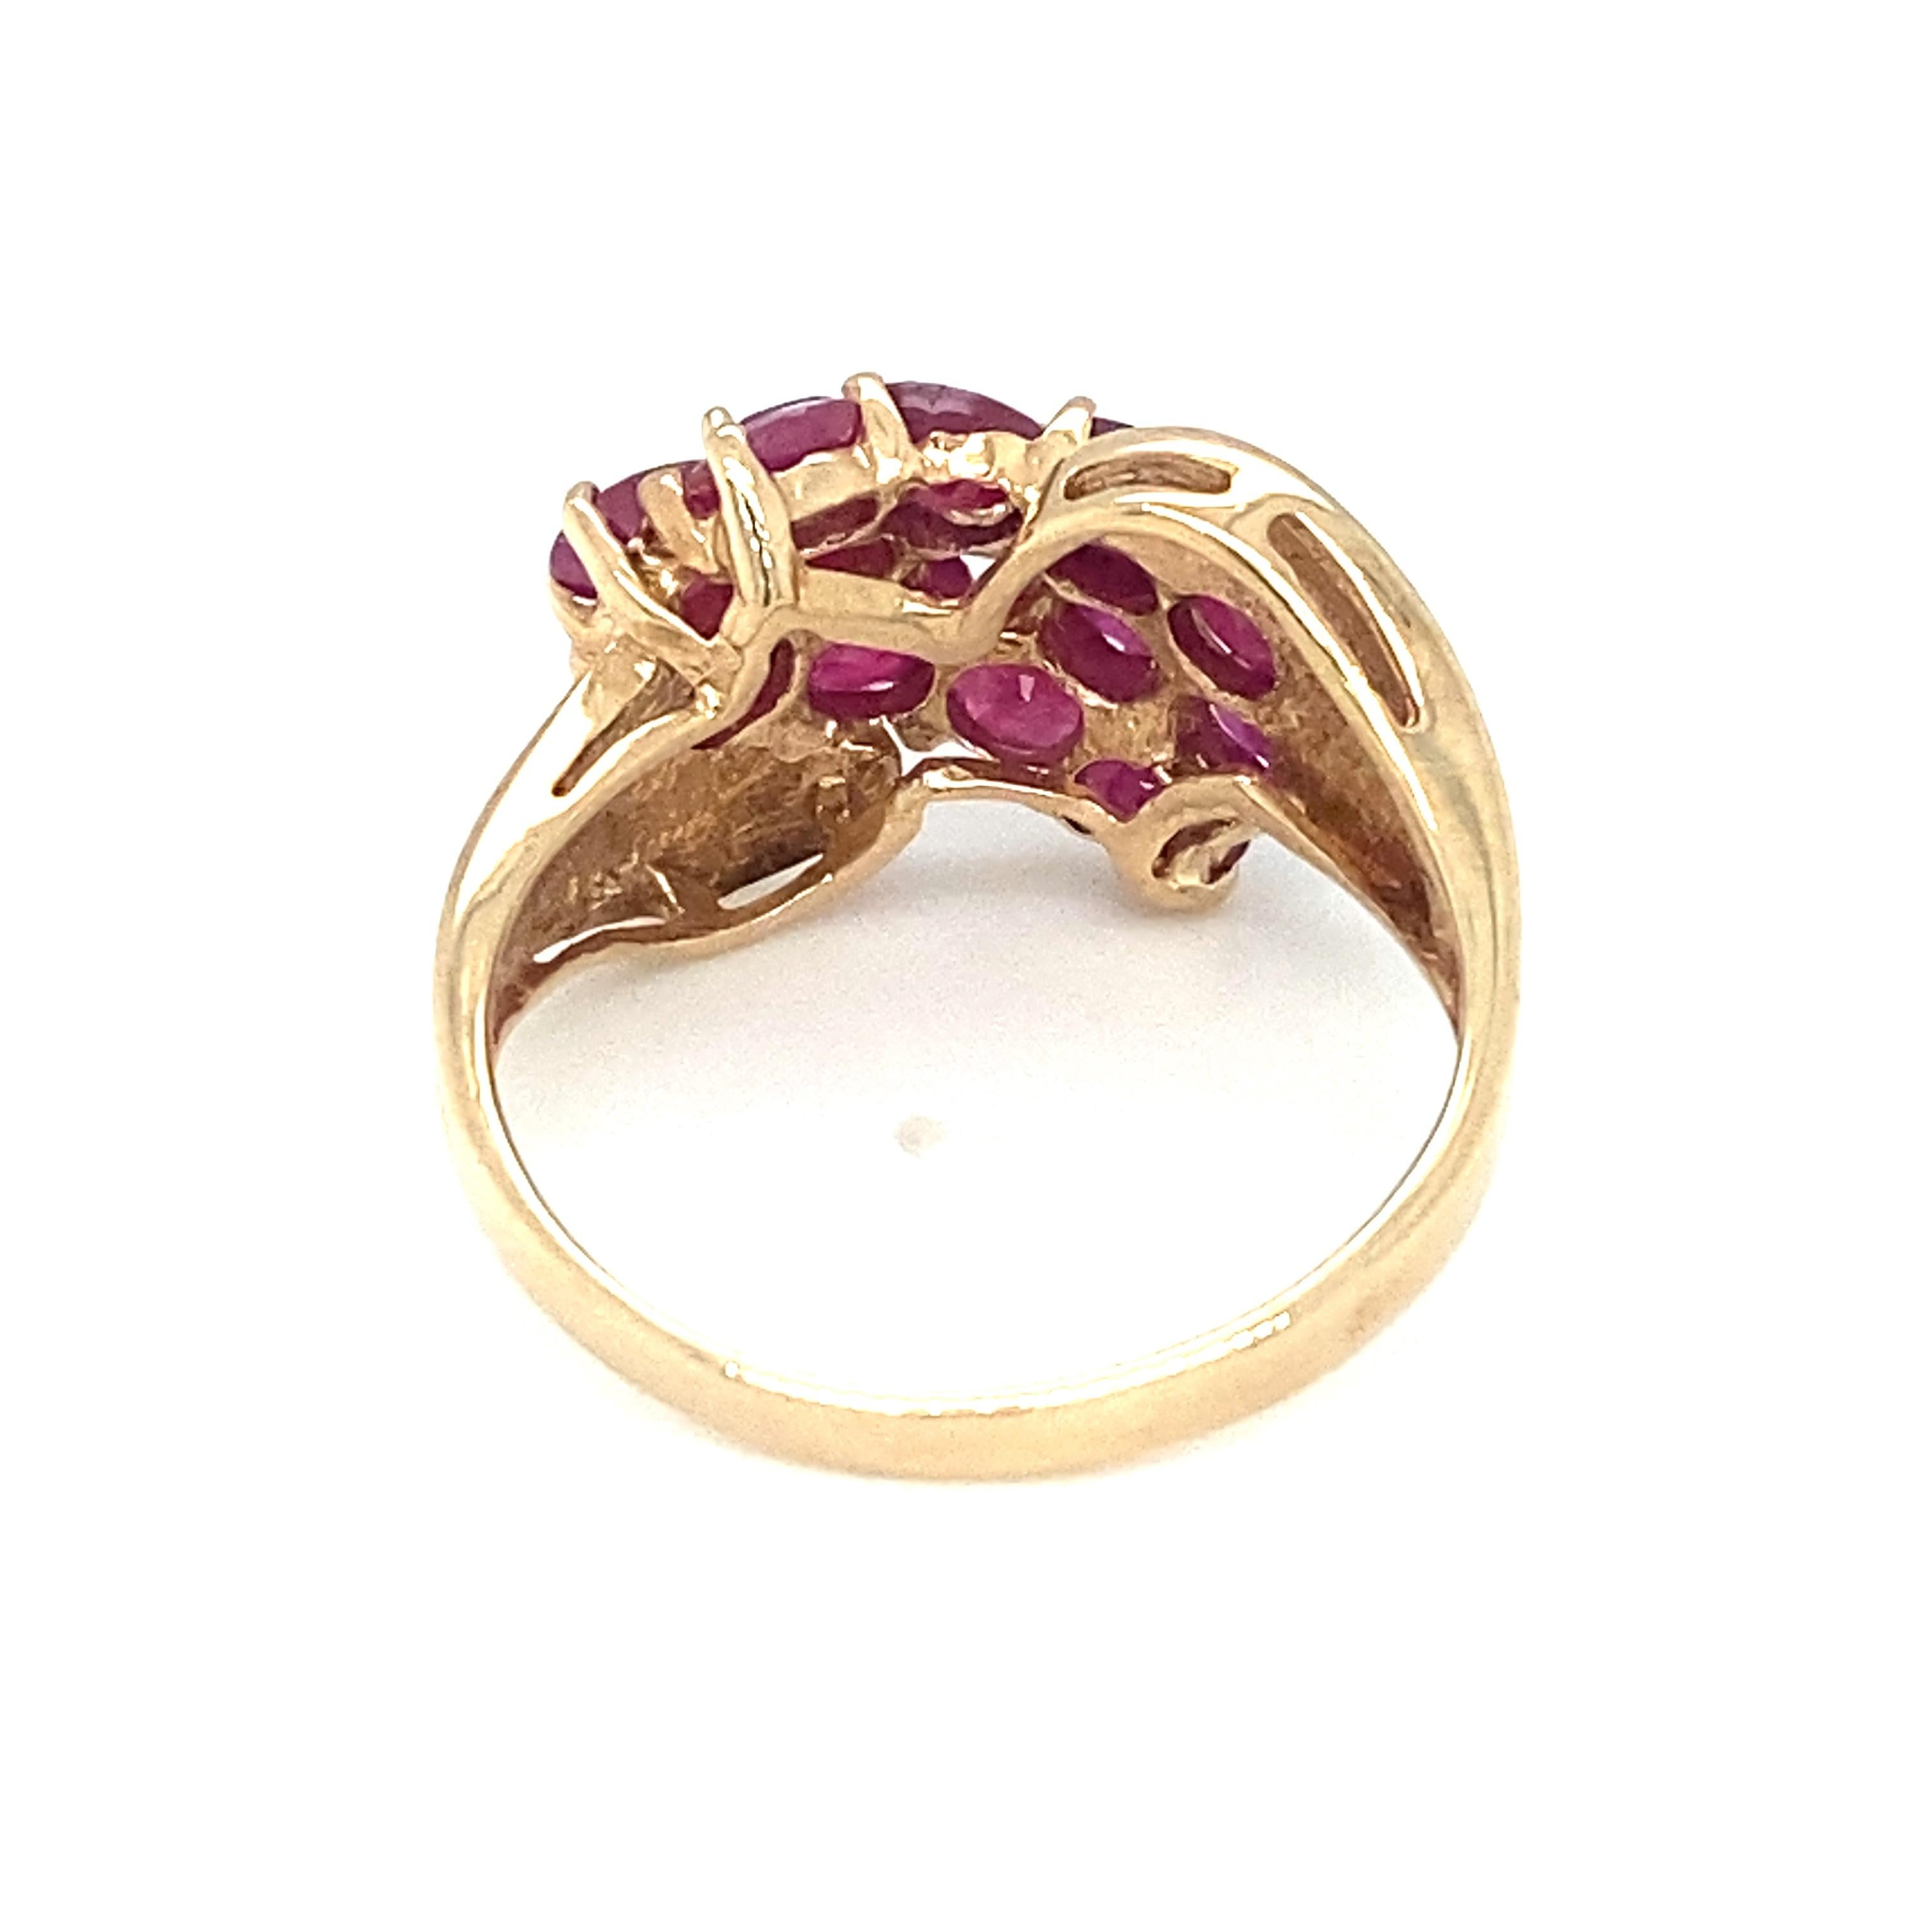 Item Details: This ring has three rows of round rubies and was made in Portugal.

Circa: 1960s
Metal Type: 10 Karat Yellow gold
Weight: 3.7 grams
Size: US 7, resizable